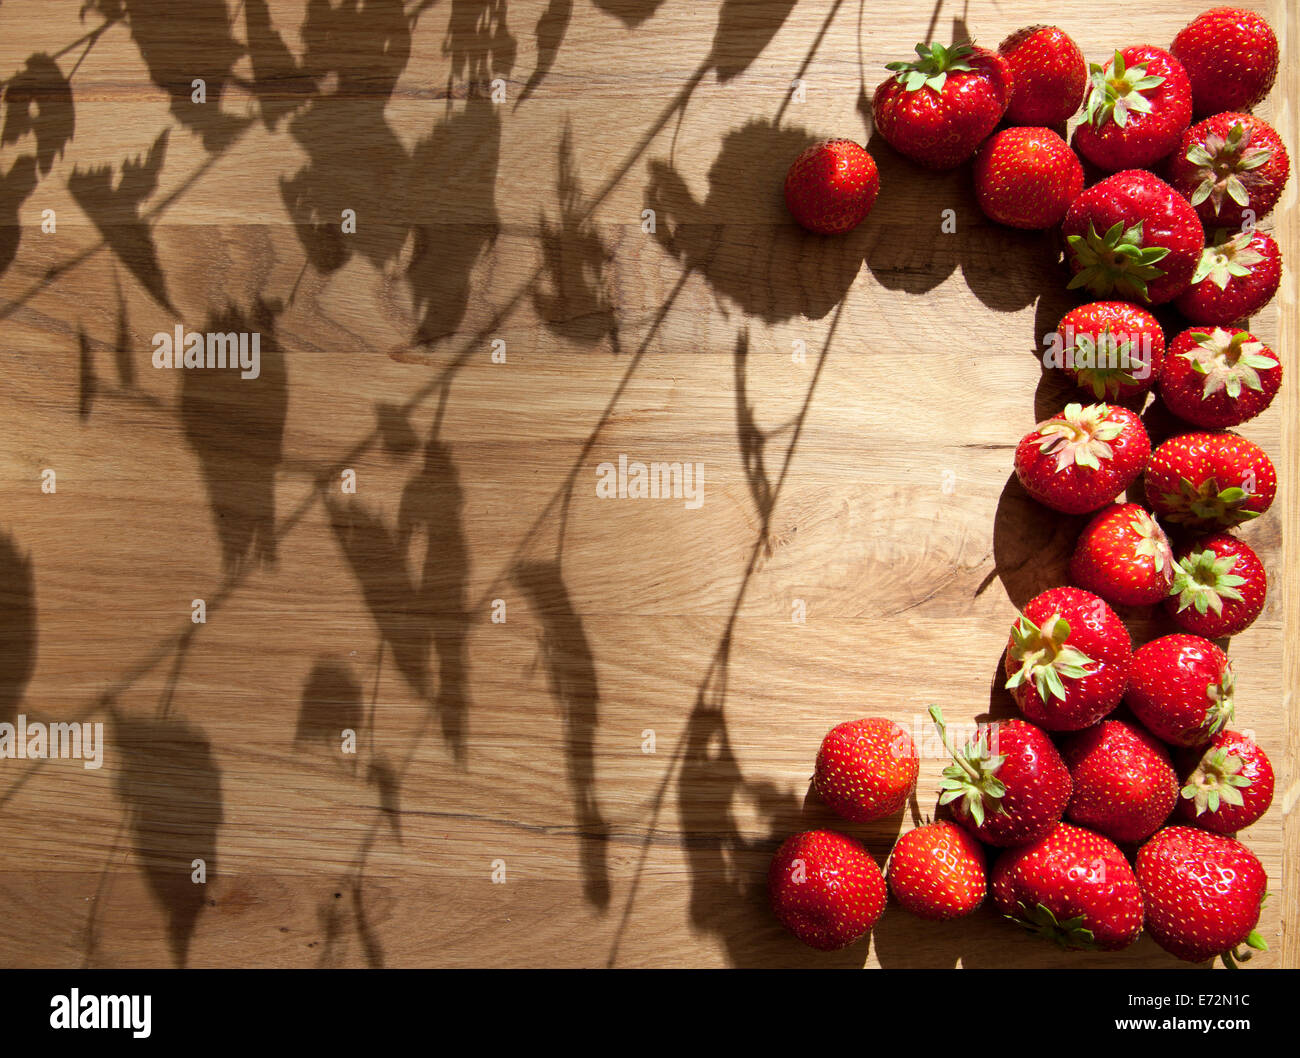 Fresh ripe red strawberries on wooden textured table top Stock Photo